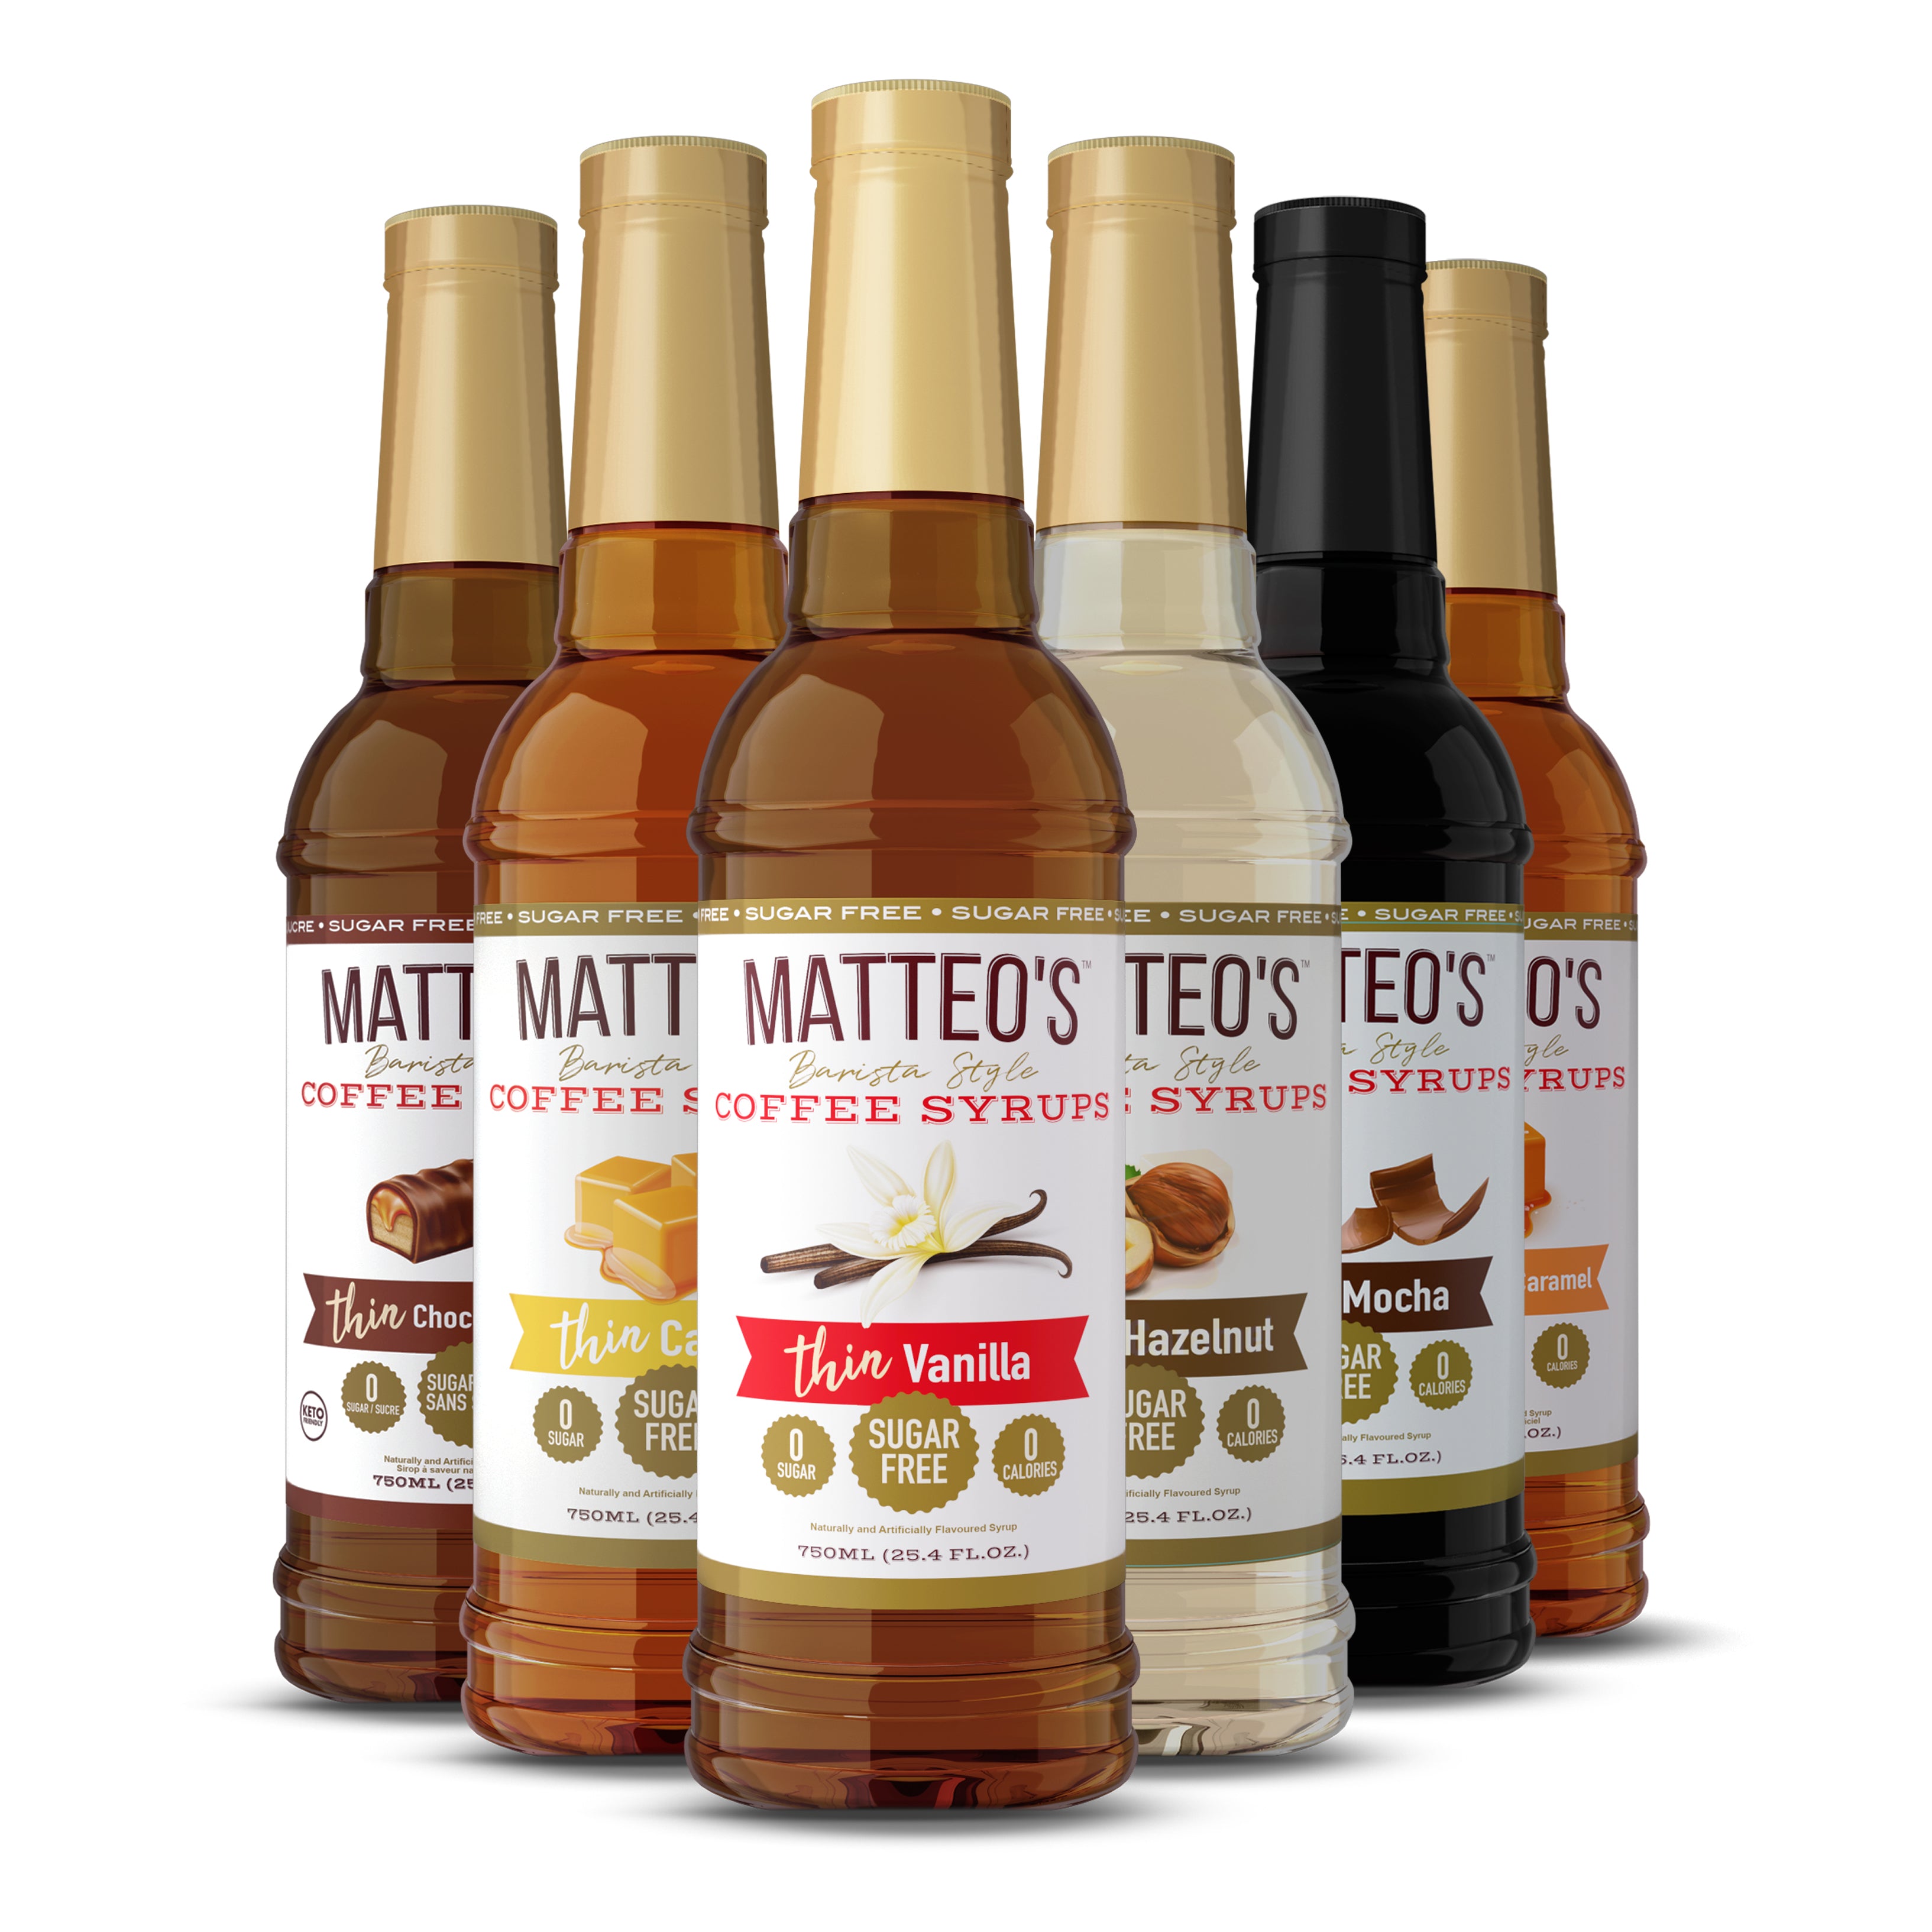 Sugar Free Coffee Syrup, Variety Pack, (6 Flavors) - Matteo's Coffee Syrup